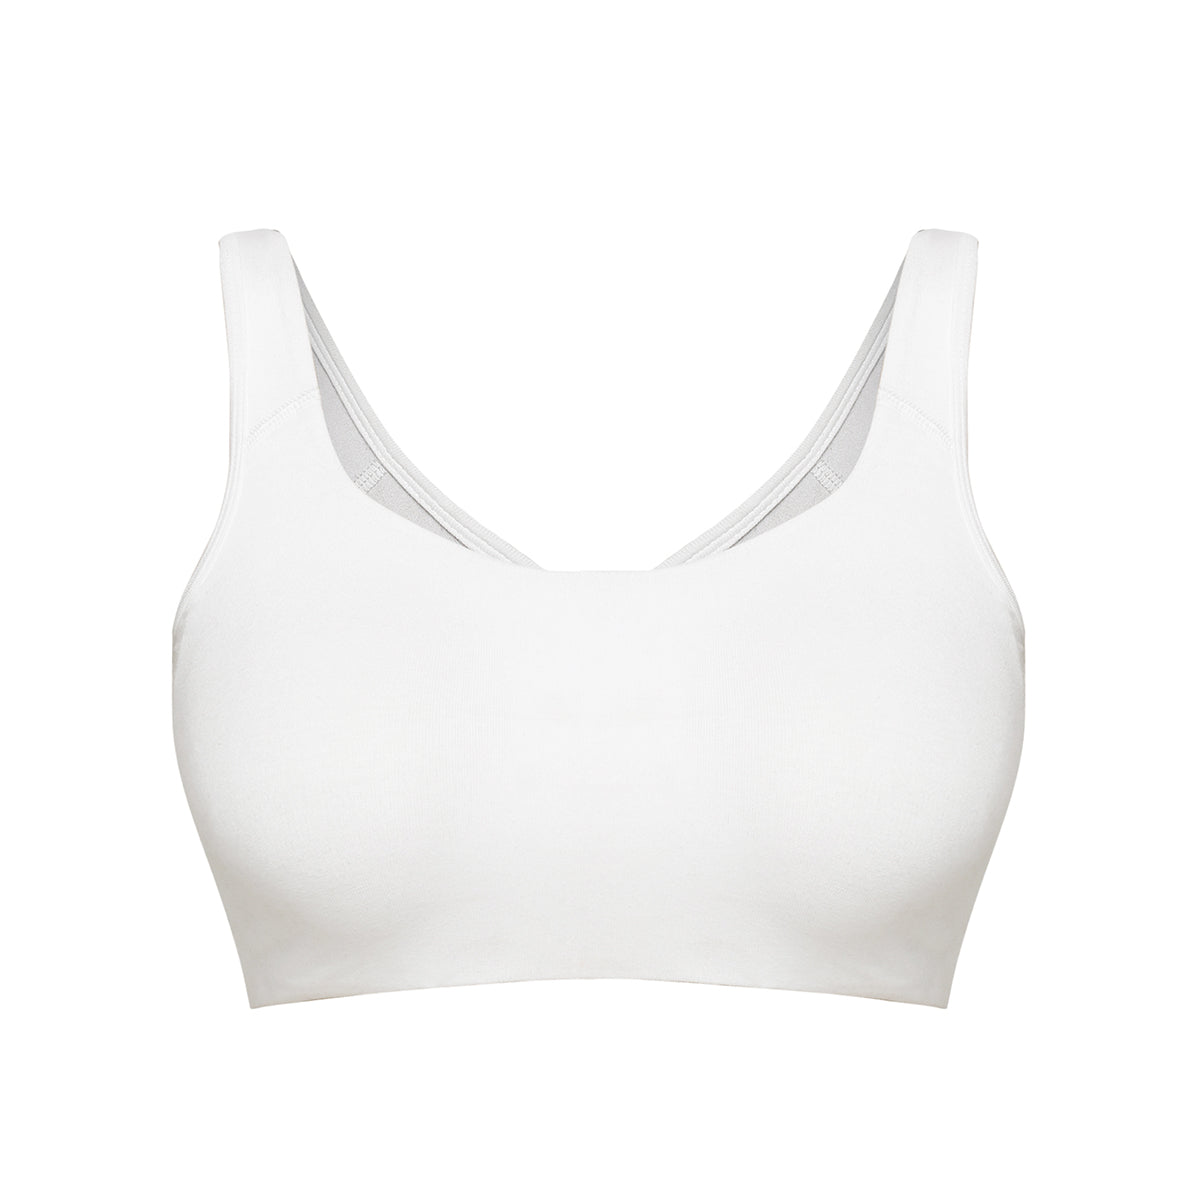 Soft cup easy-peasy slip-on bra with Full coverage  - White NYB113